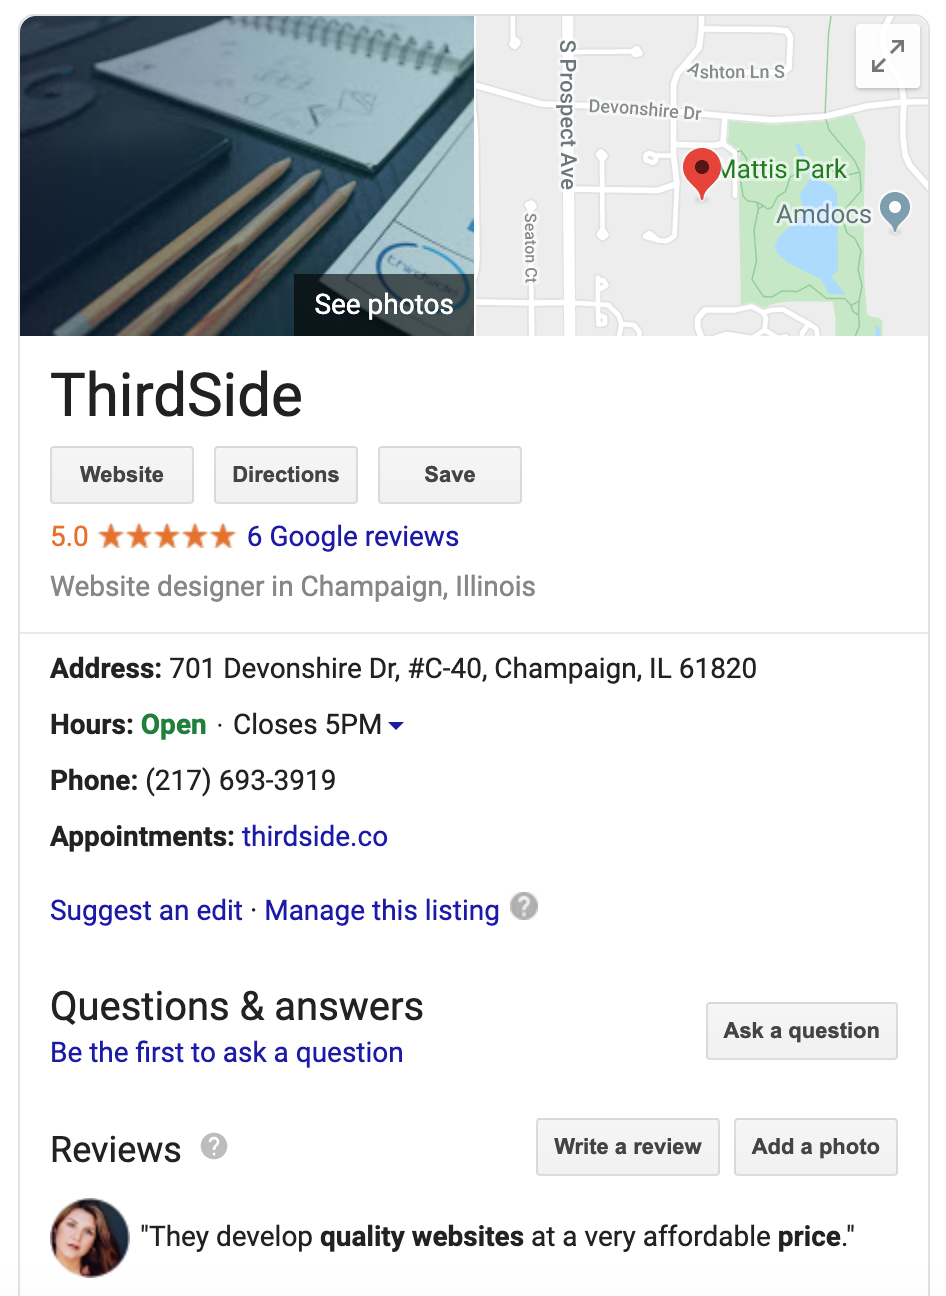 Google My Business helps get more visitors to your website